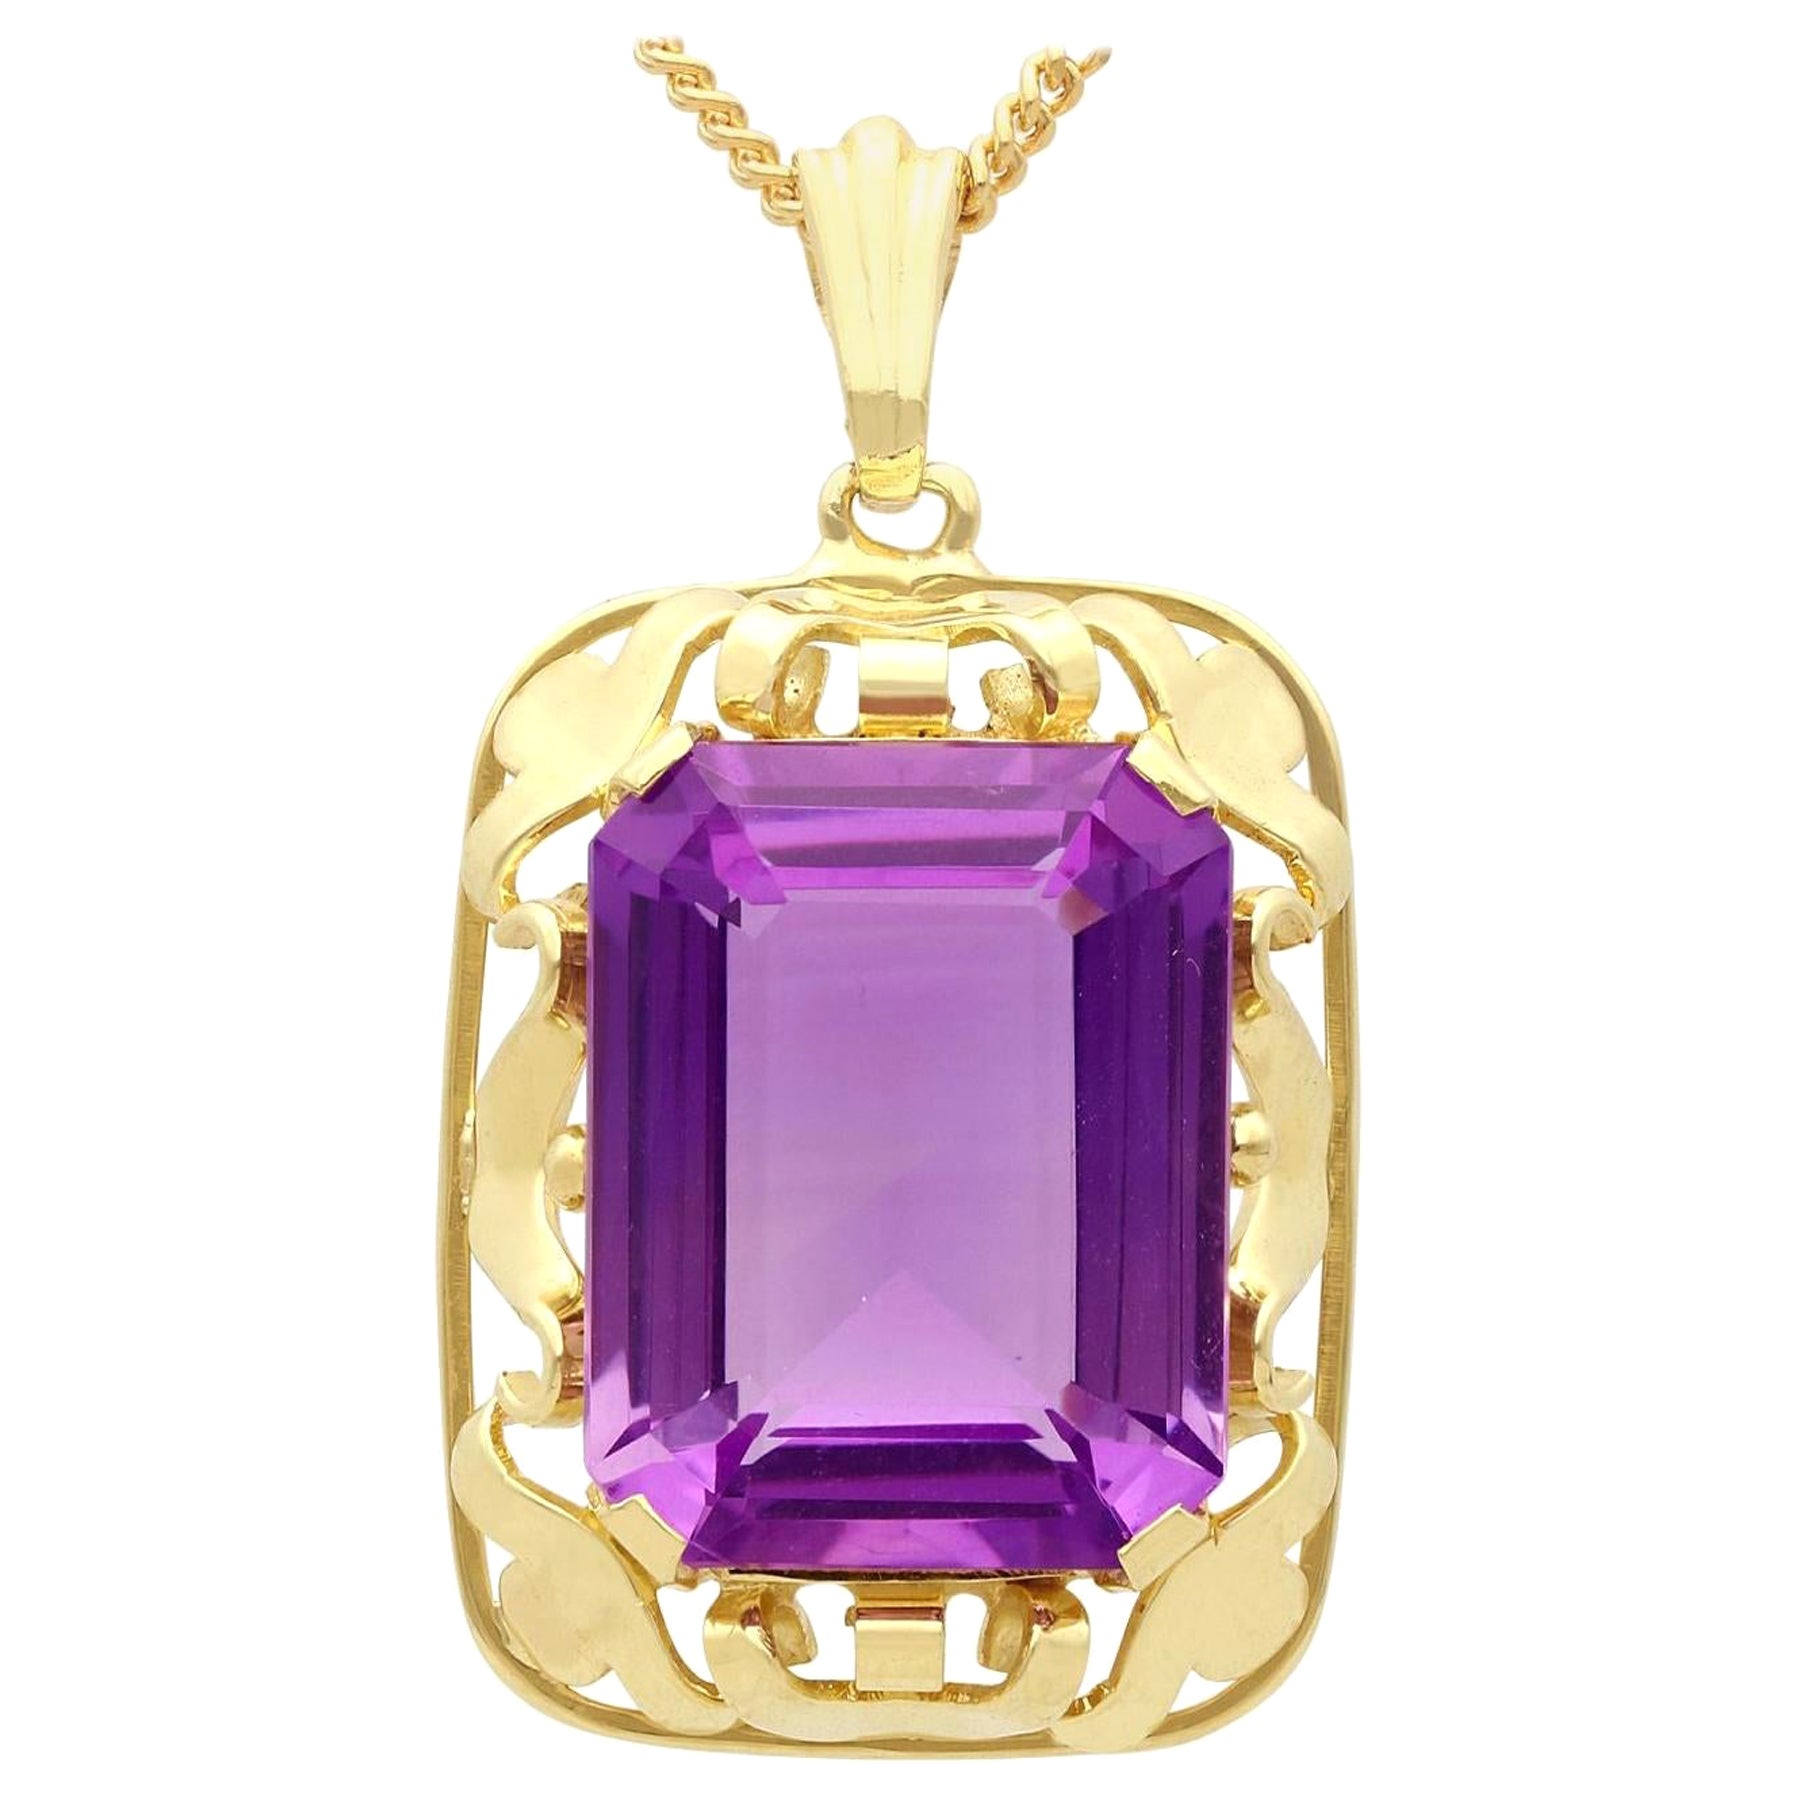 Vintage 1950s 15.41 Carat Amethyst and Yellow Gold Pendant